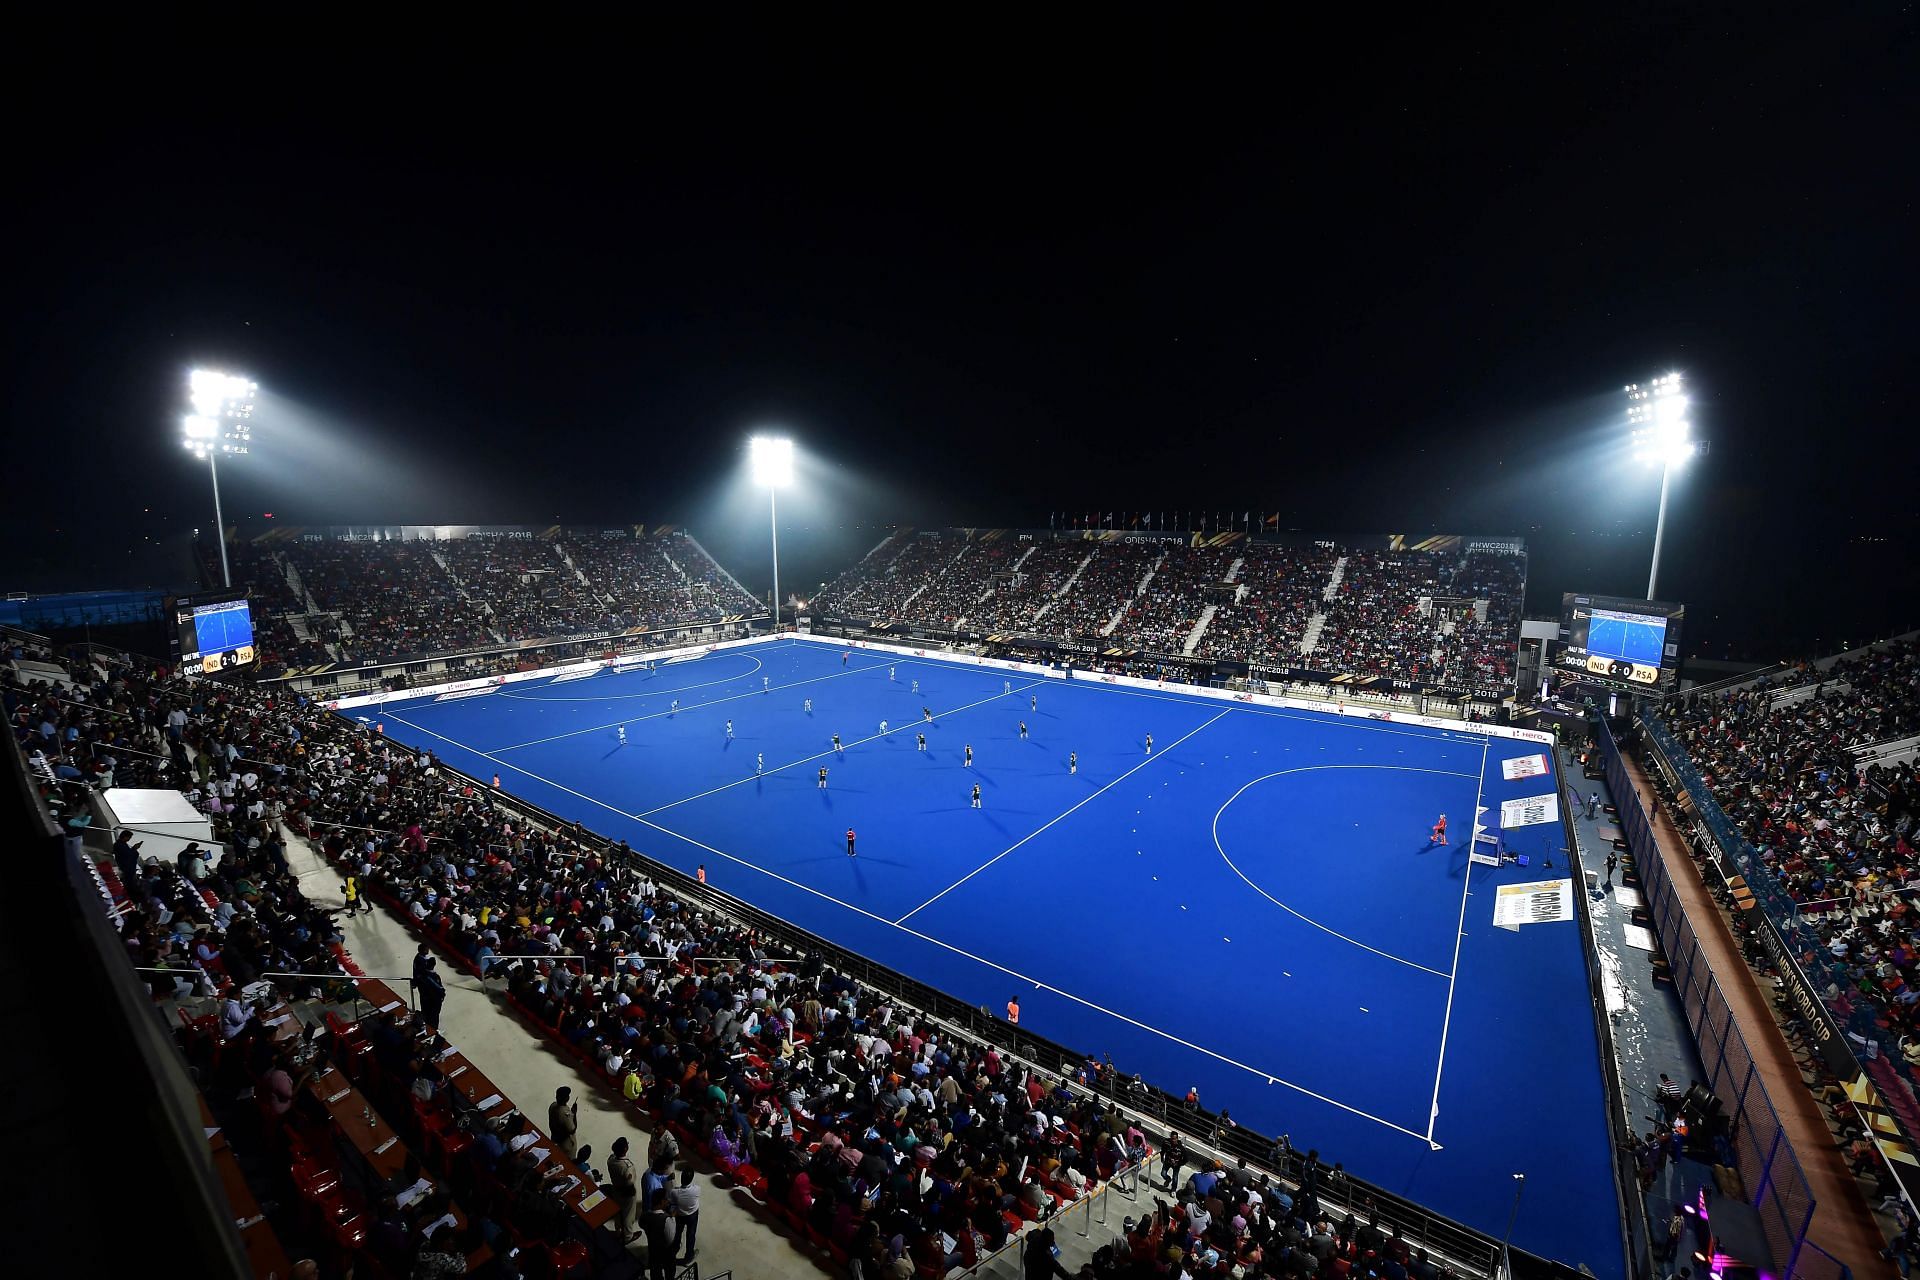 A view of the Kalinga Stadium in Bhubaneswar. (PC: Getty Images)